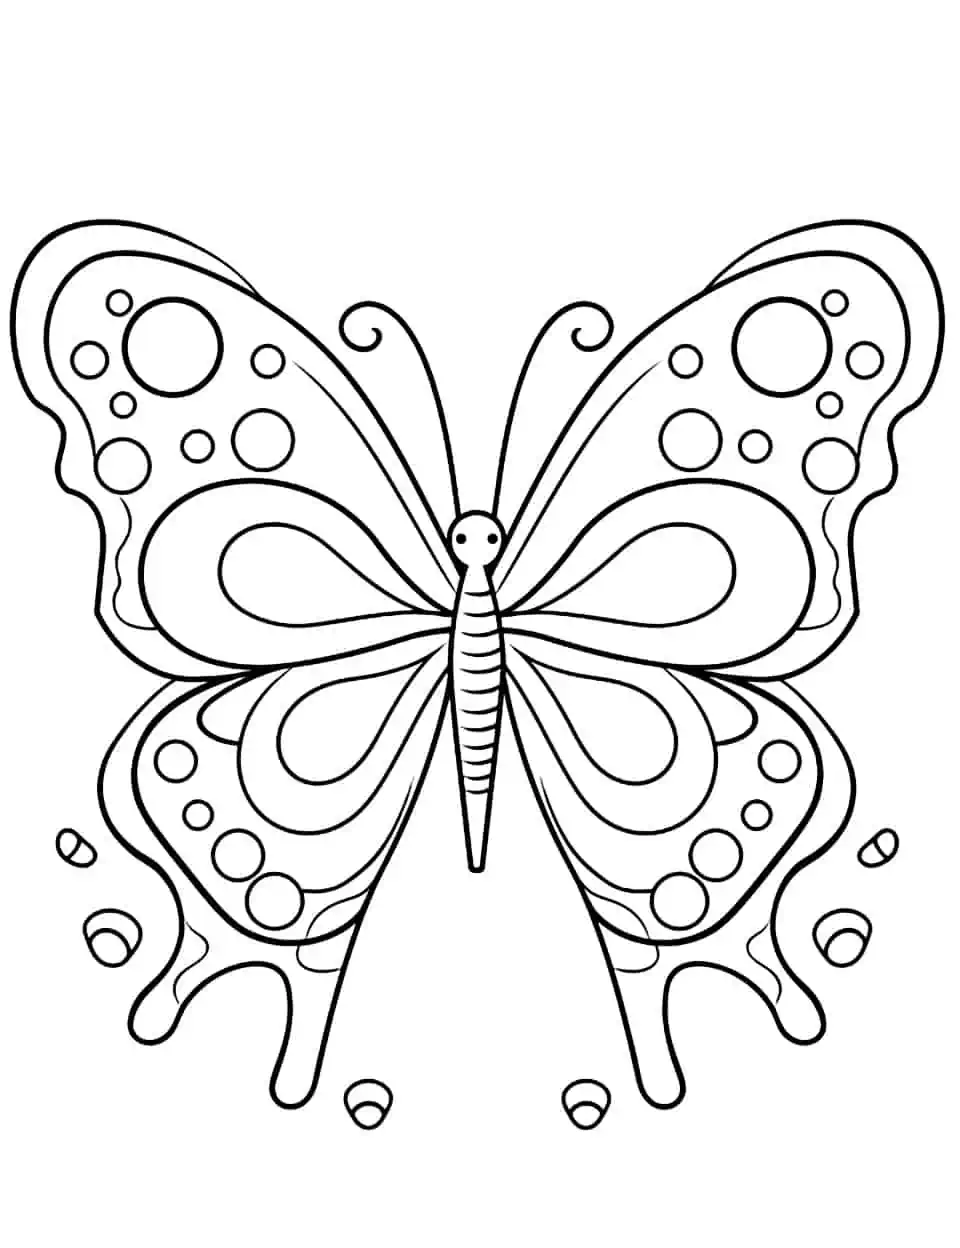 Rainbow Wingspan Butterfly Coloring Page - A vibrant coloring page showcasing a butterfly with an expansive rainbow-colored wingspan.